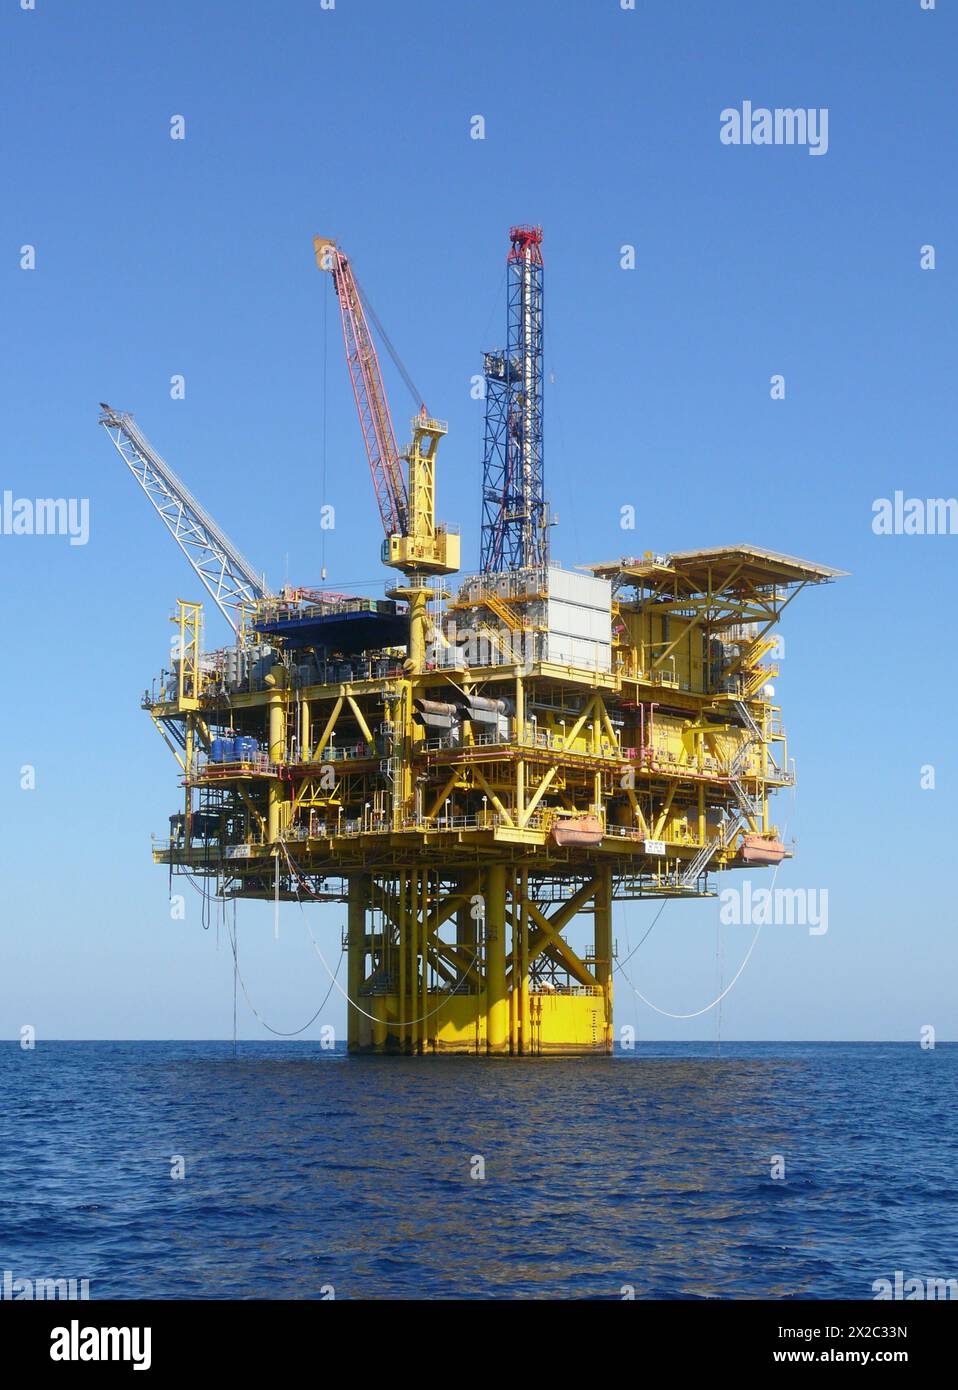 Mississippi Canyon 243 fixed, multi-well offshore oil and gas drilling and production platform in the Gulf of Mexico off the SE coast of Louisiana. Stock Photo